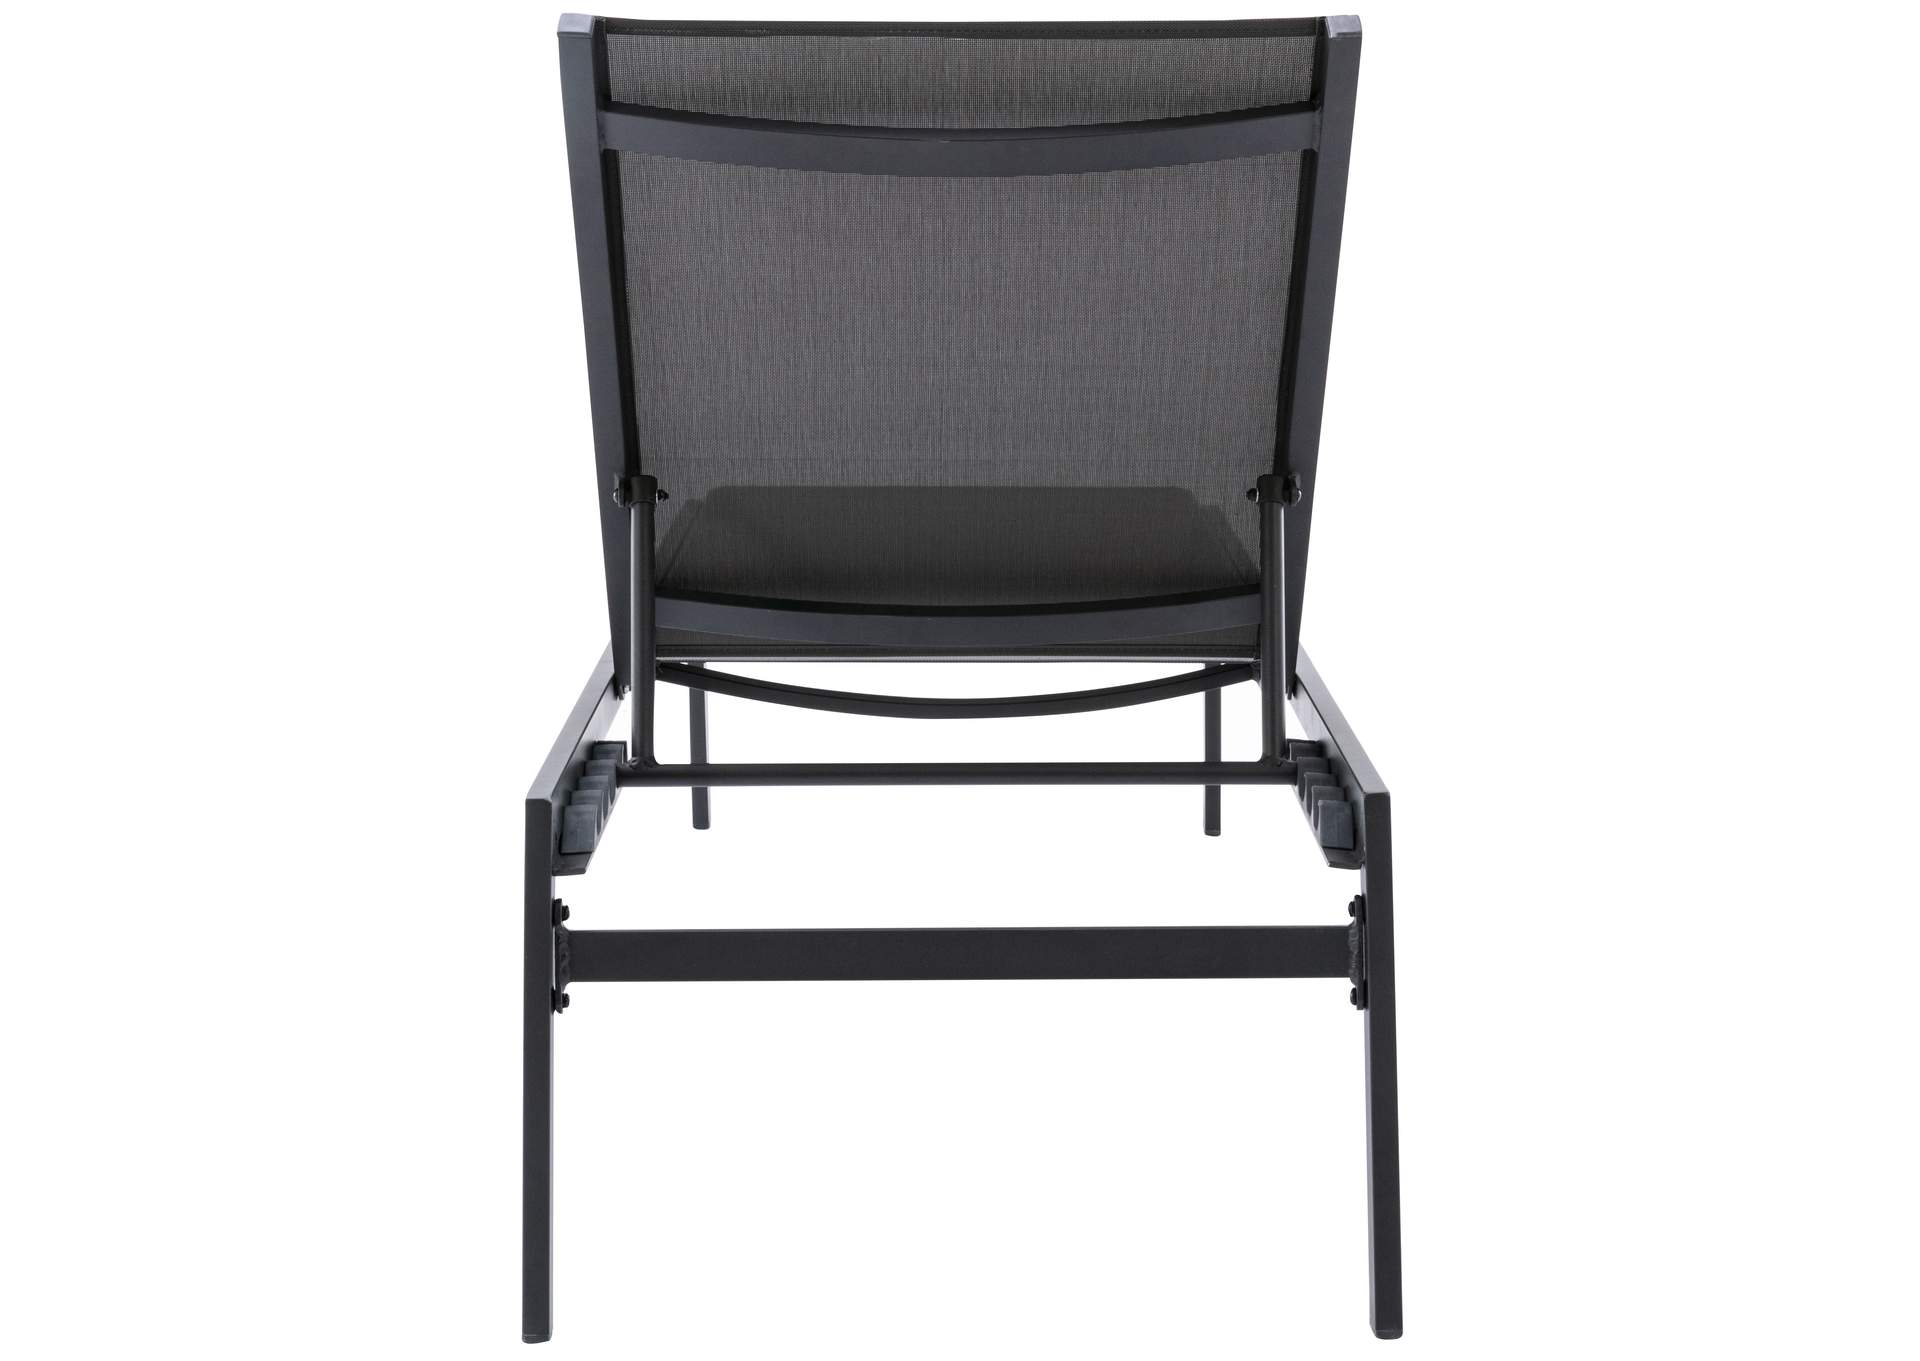 Santorini Grey Resilient Mesh Water Resistant Fabric Outdoor Patio Aluminum Mesh Chaise Lounge Chair,Meridian Furniture